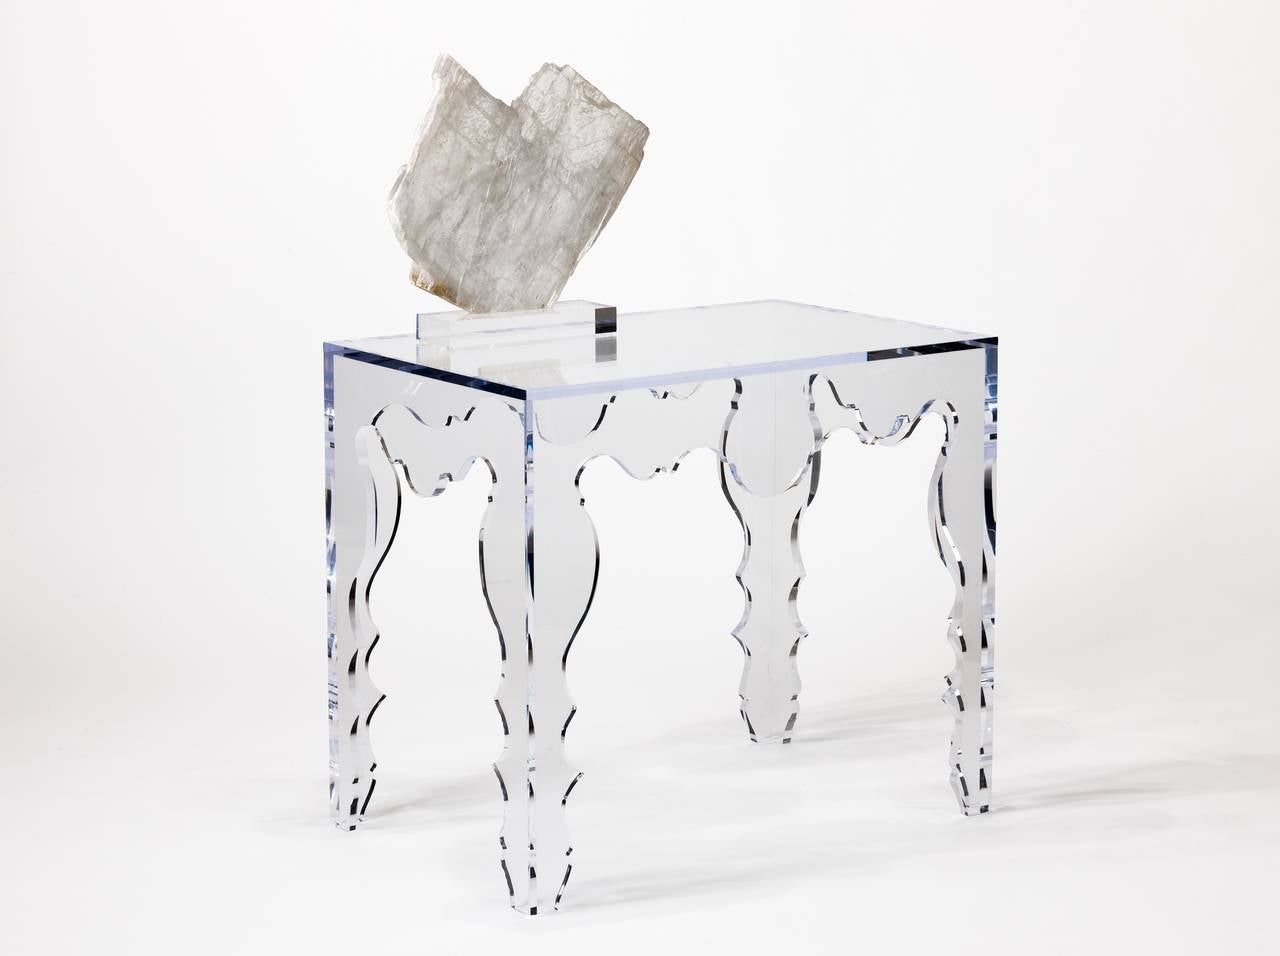 Bringing a modern edge to classic design, this contemporary acrylic console table from the custom Tara Shaw Maison collection will make a statement in any space. Pairs with acrylic Tara Shaw's coffee and martini tables. Handcrafted in New Orleans.